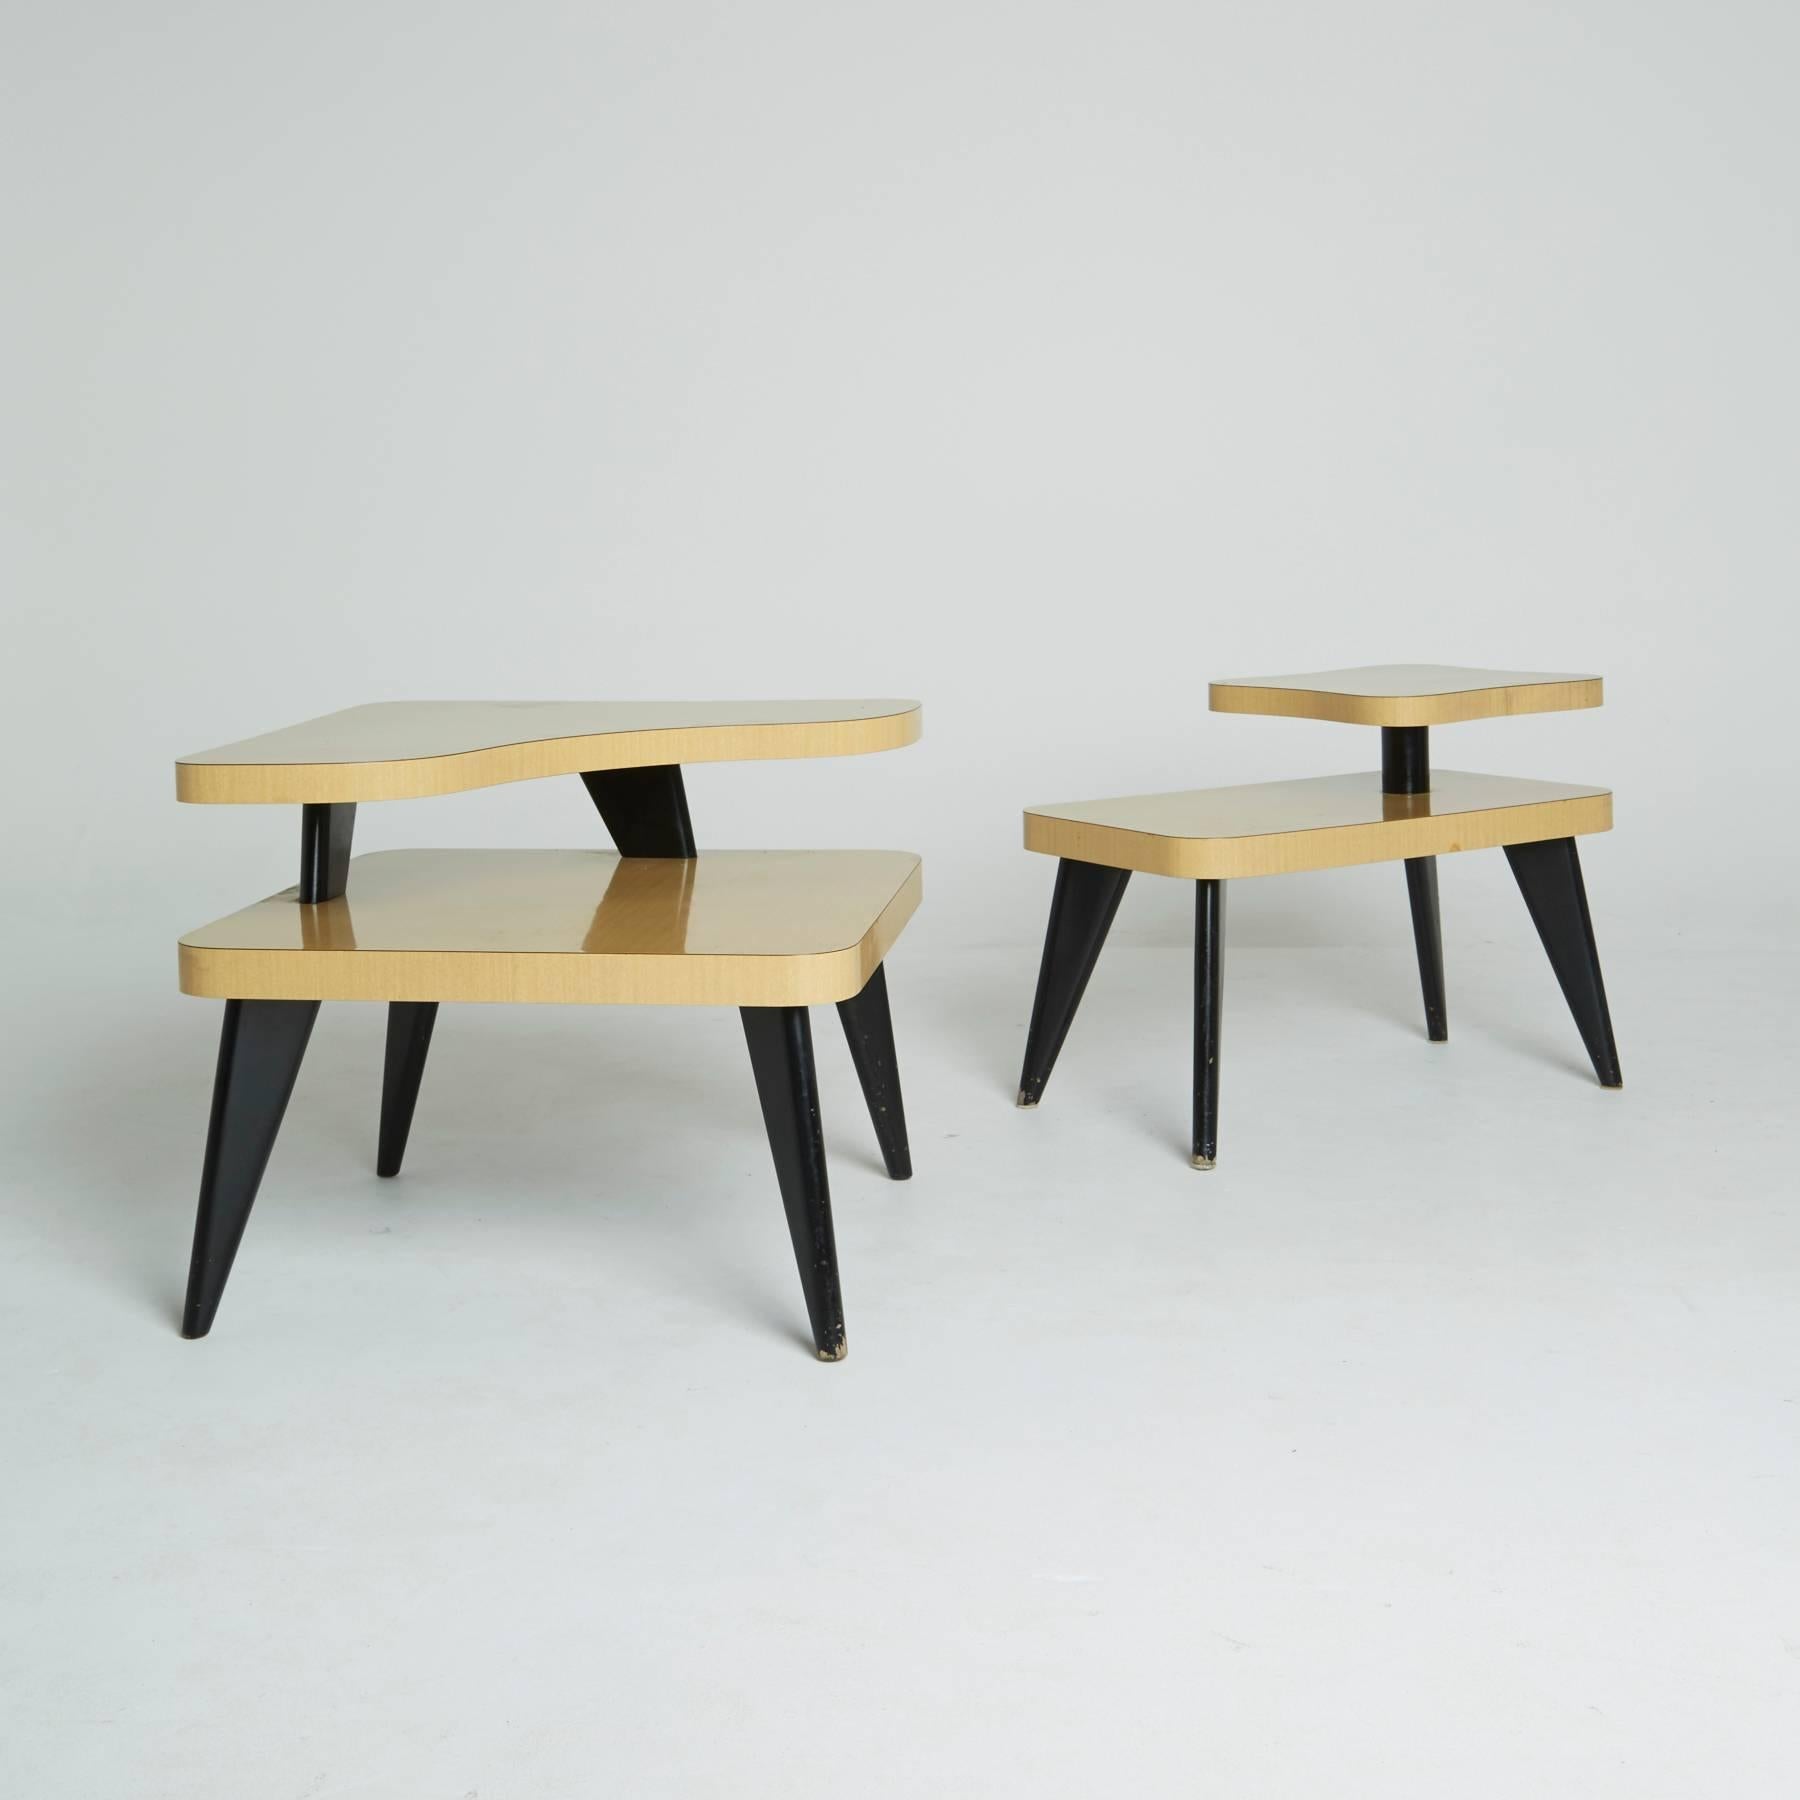 Each atomic, blonde laminate tables of these are two-tiered, with a biomorphic shape on the top surface. Their black tapered legs are an eye-catching contrast to the light wood appearance. Both of these are perfect as side tables, end tables, or